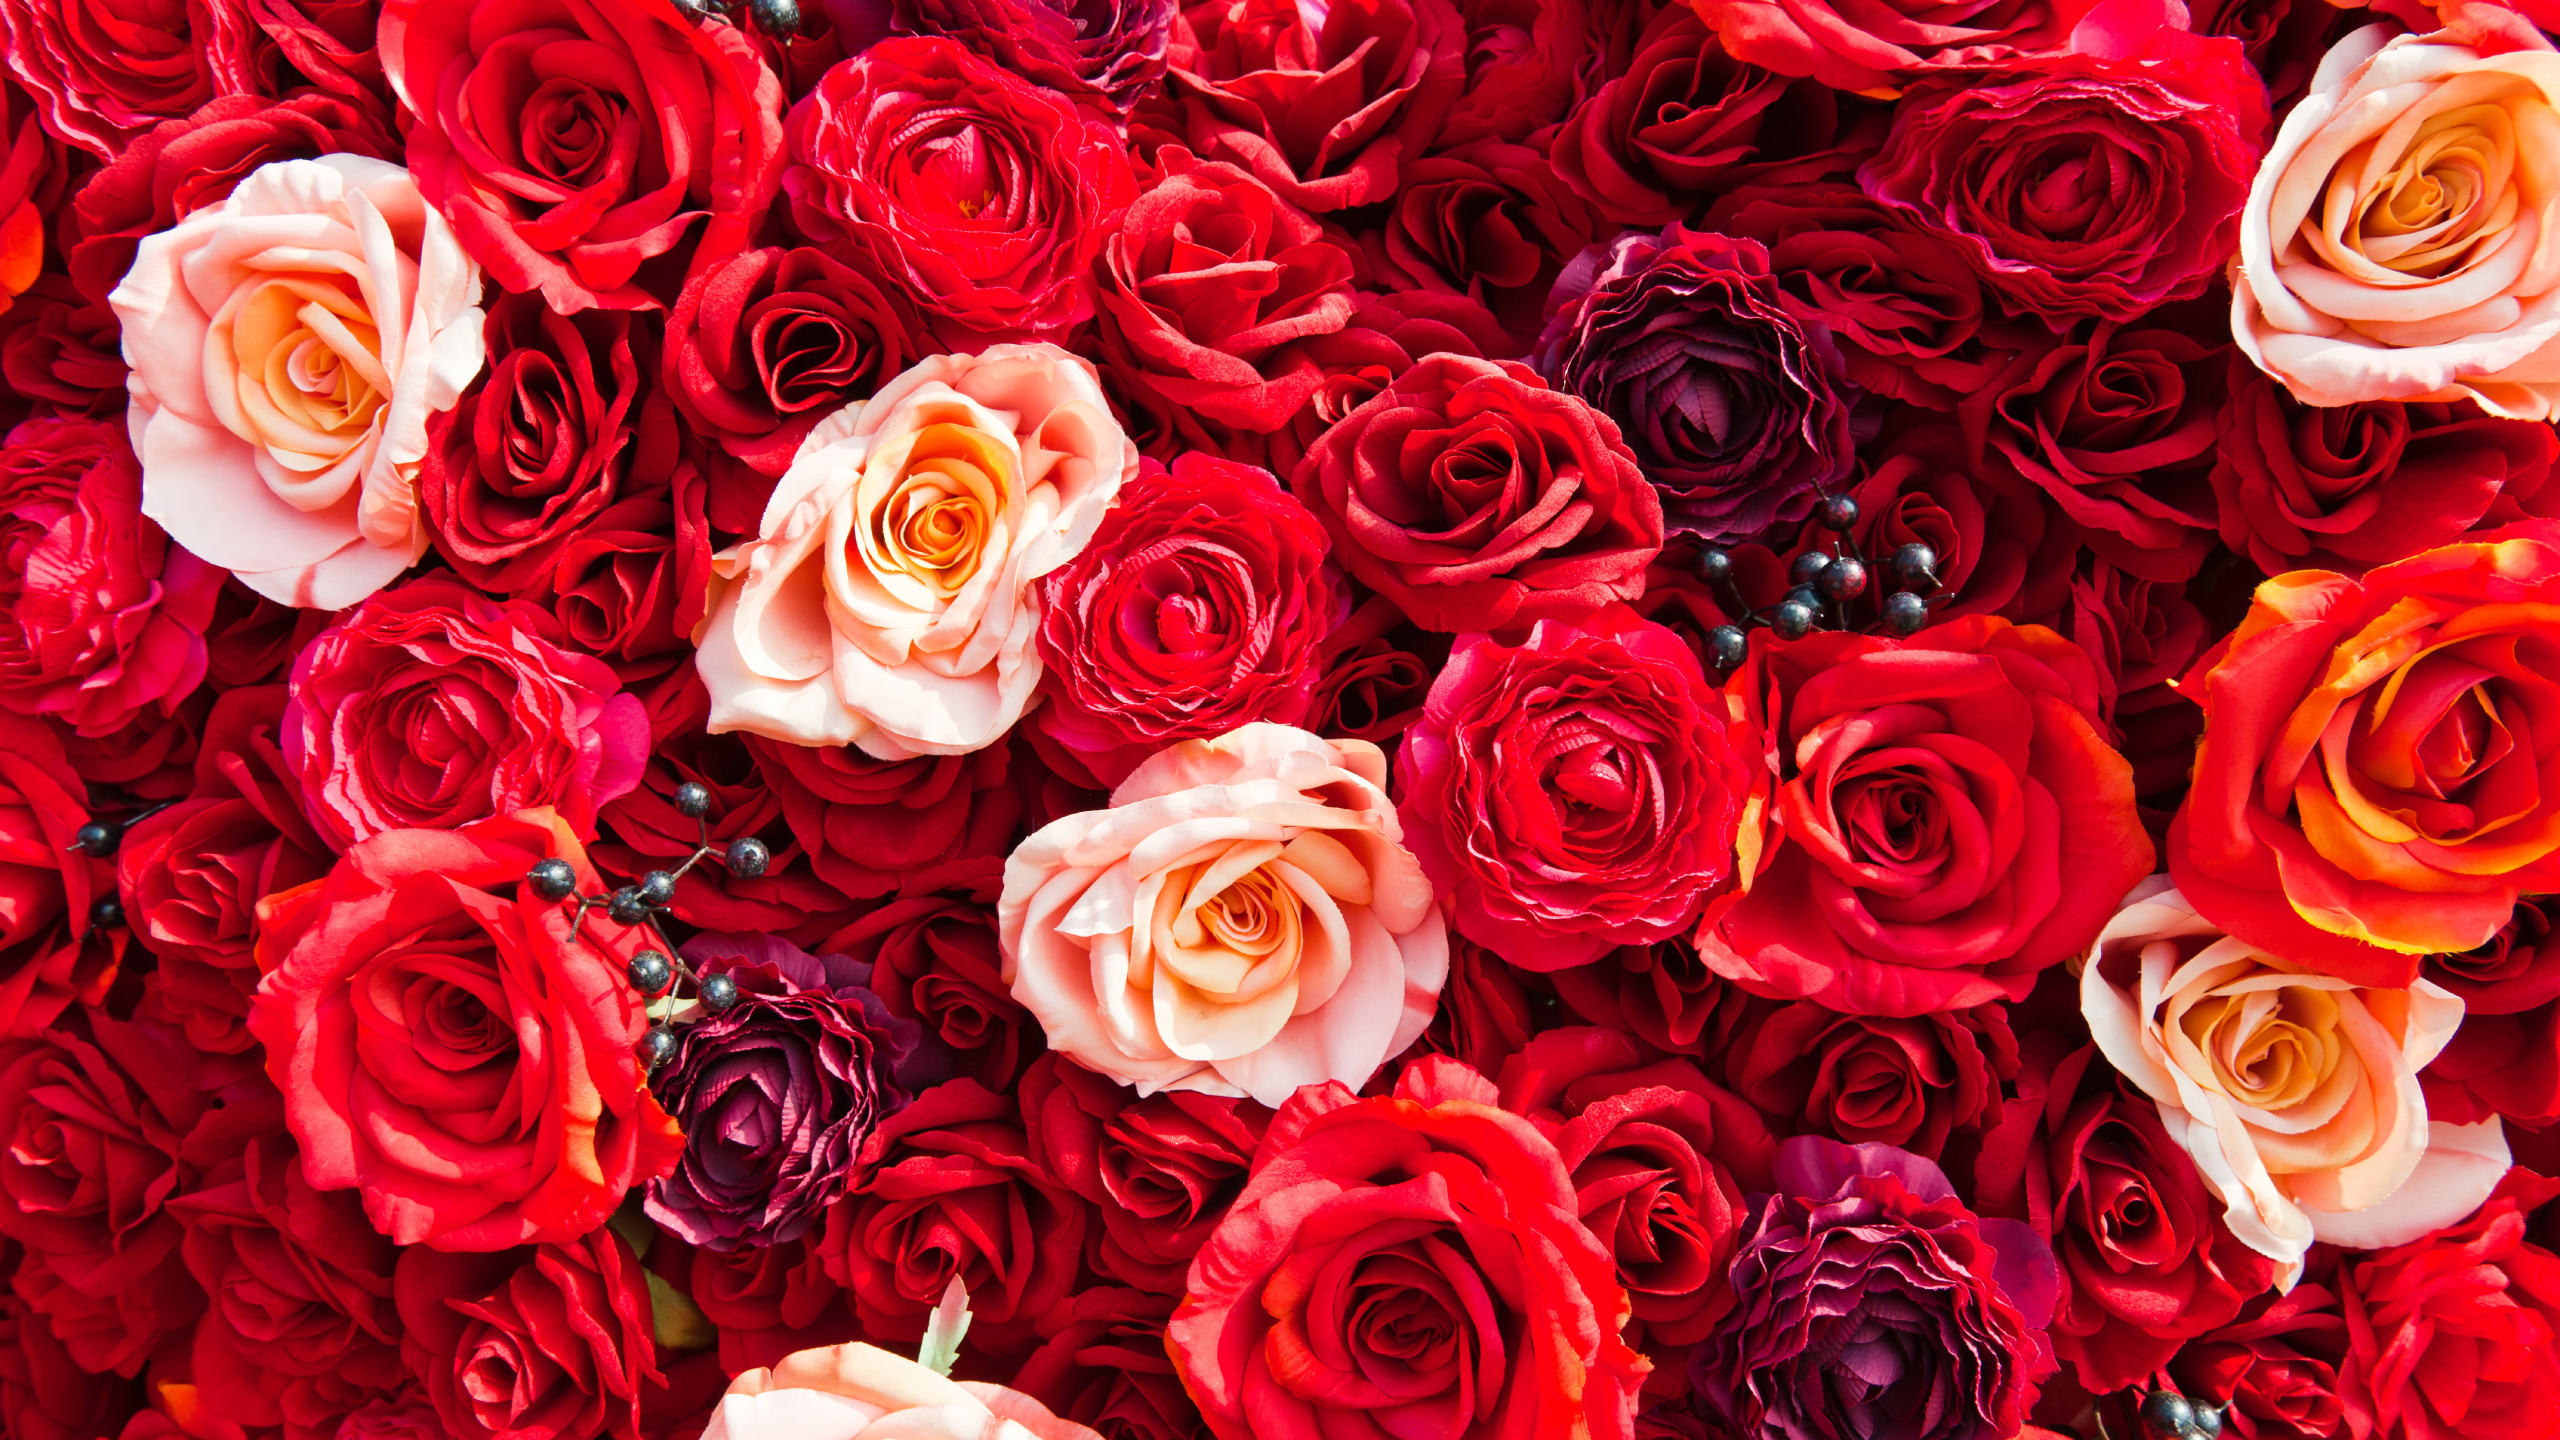 Red and White Roses Bouquet. Wallpaper in 2560x1440 Resolution